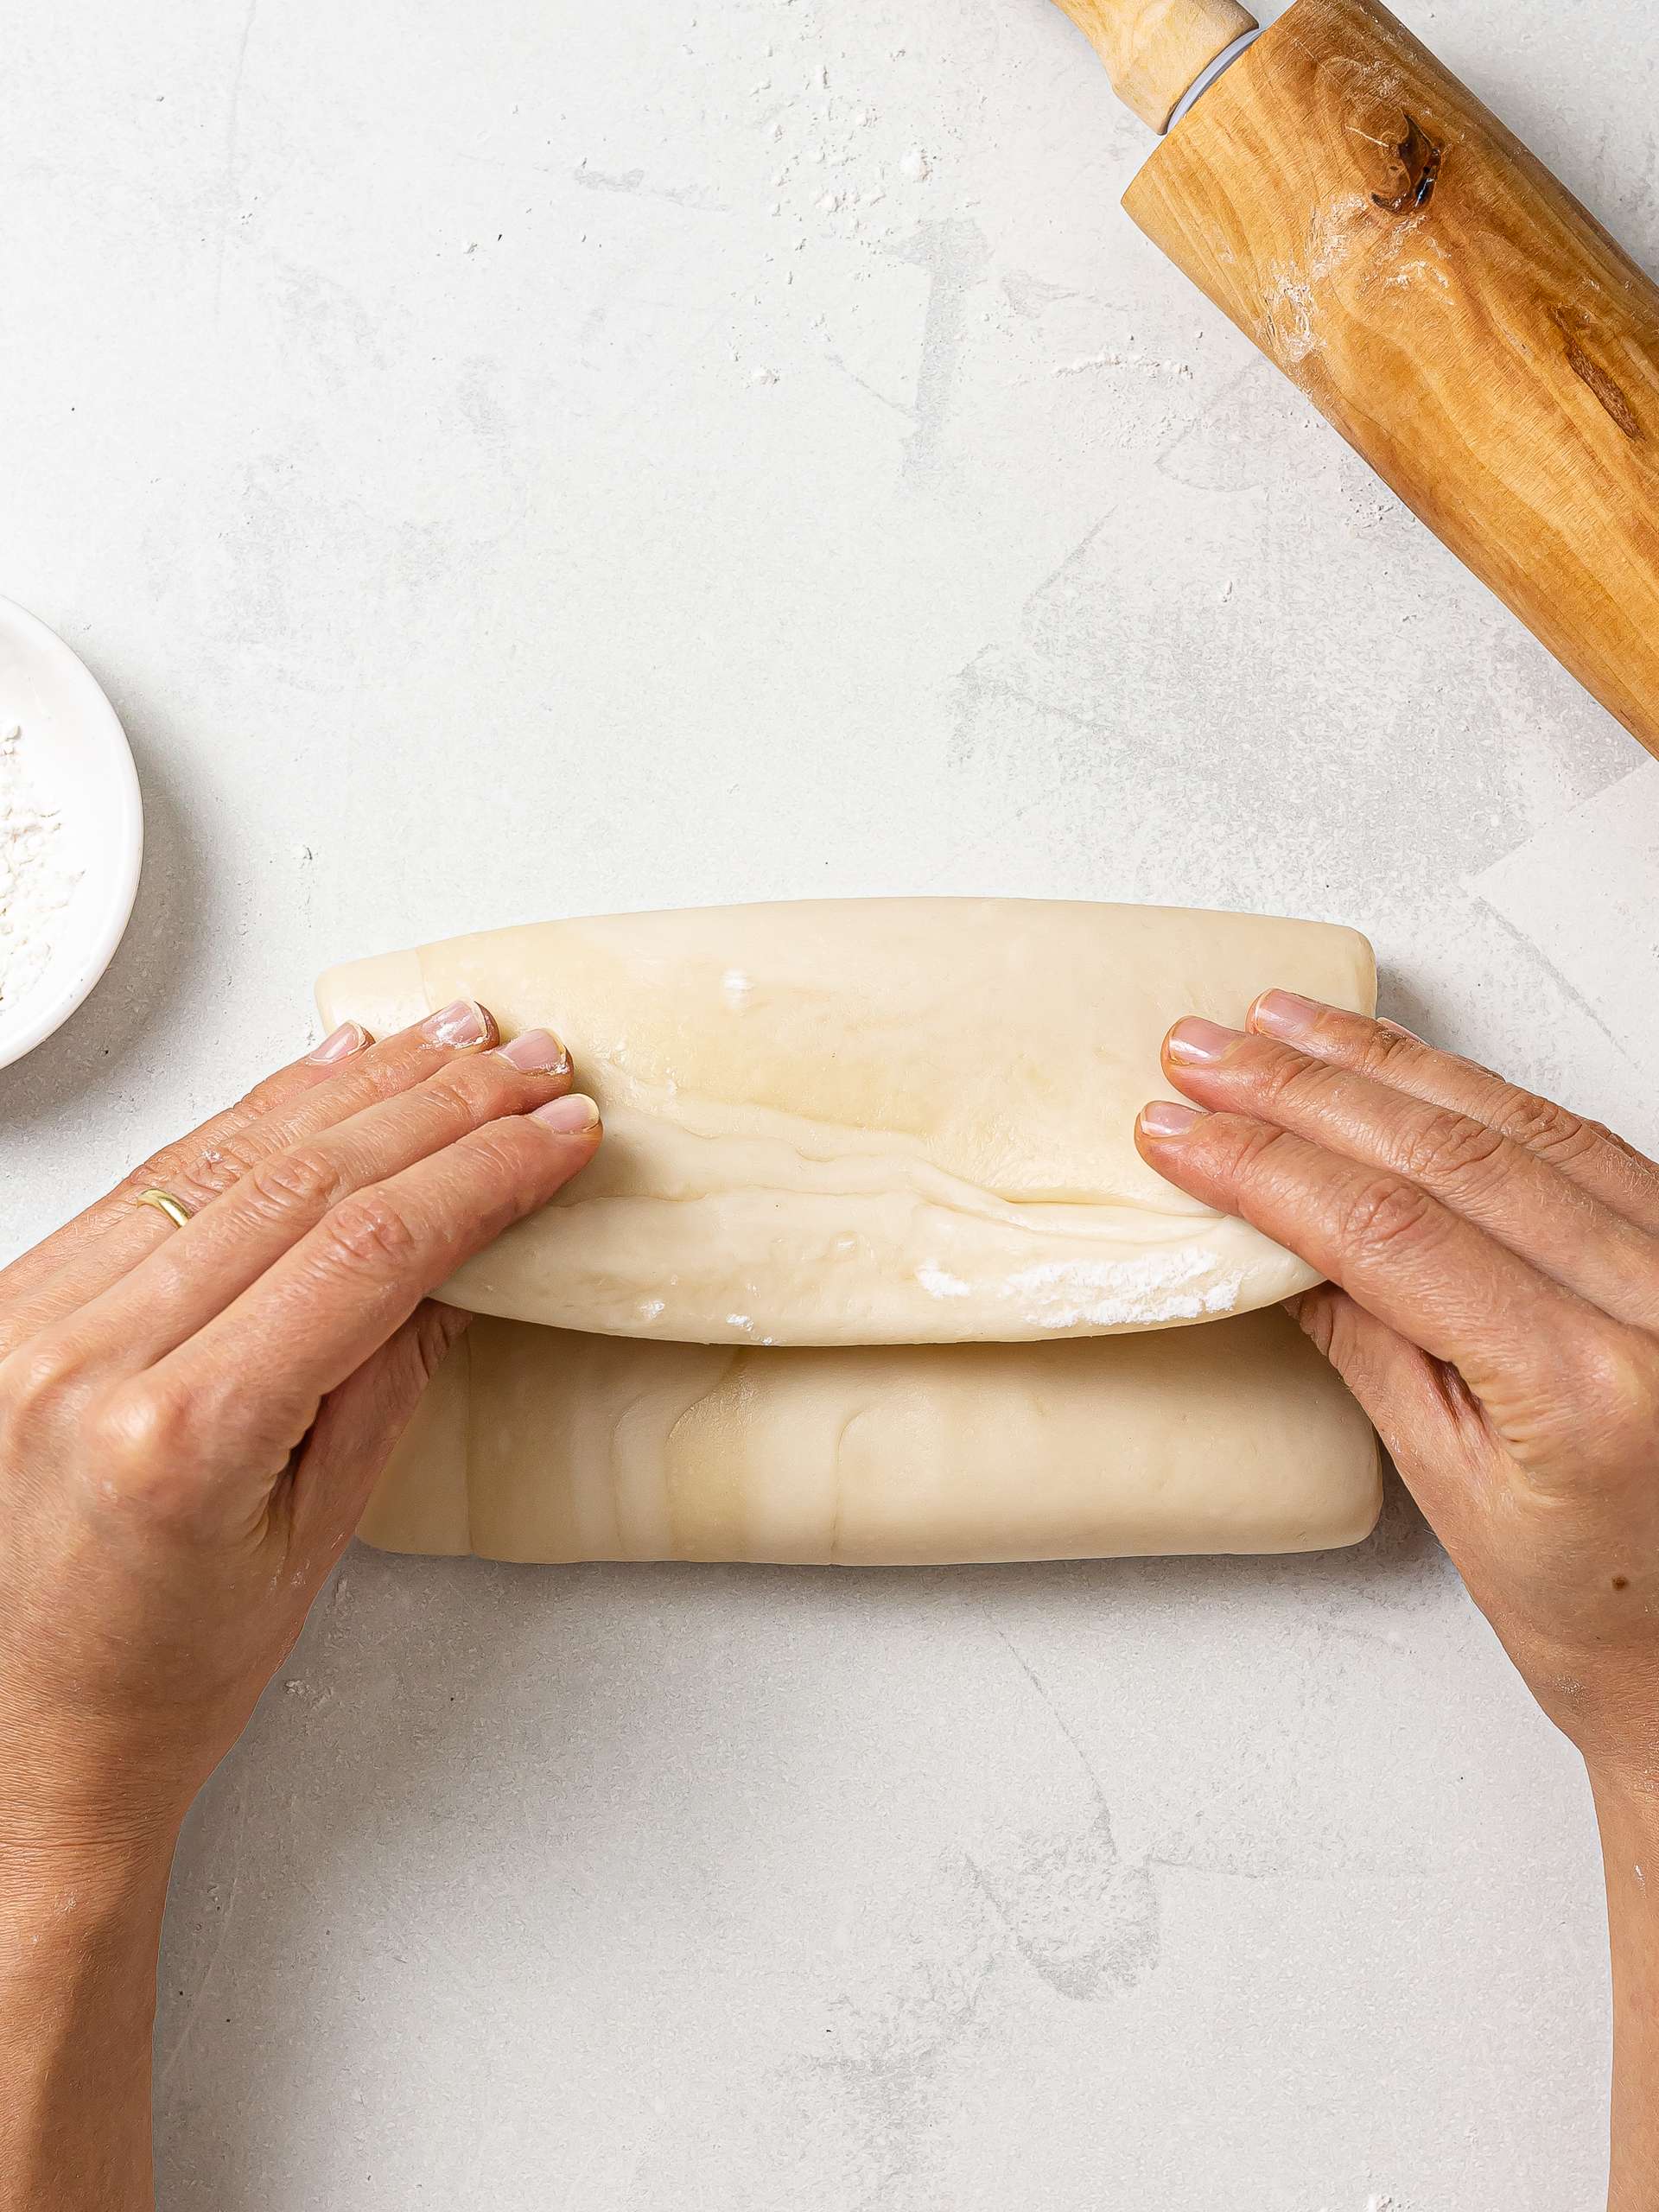 pastry dough folded like an envelope for lamination